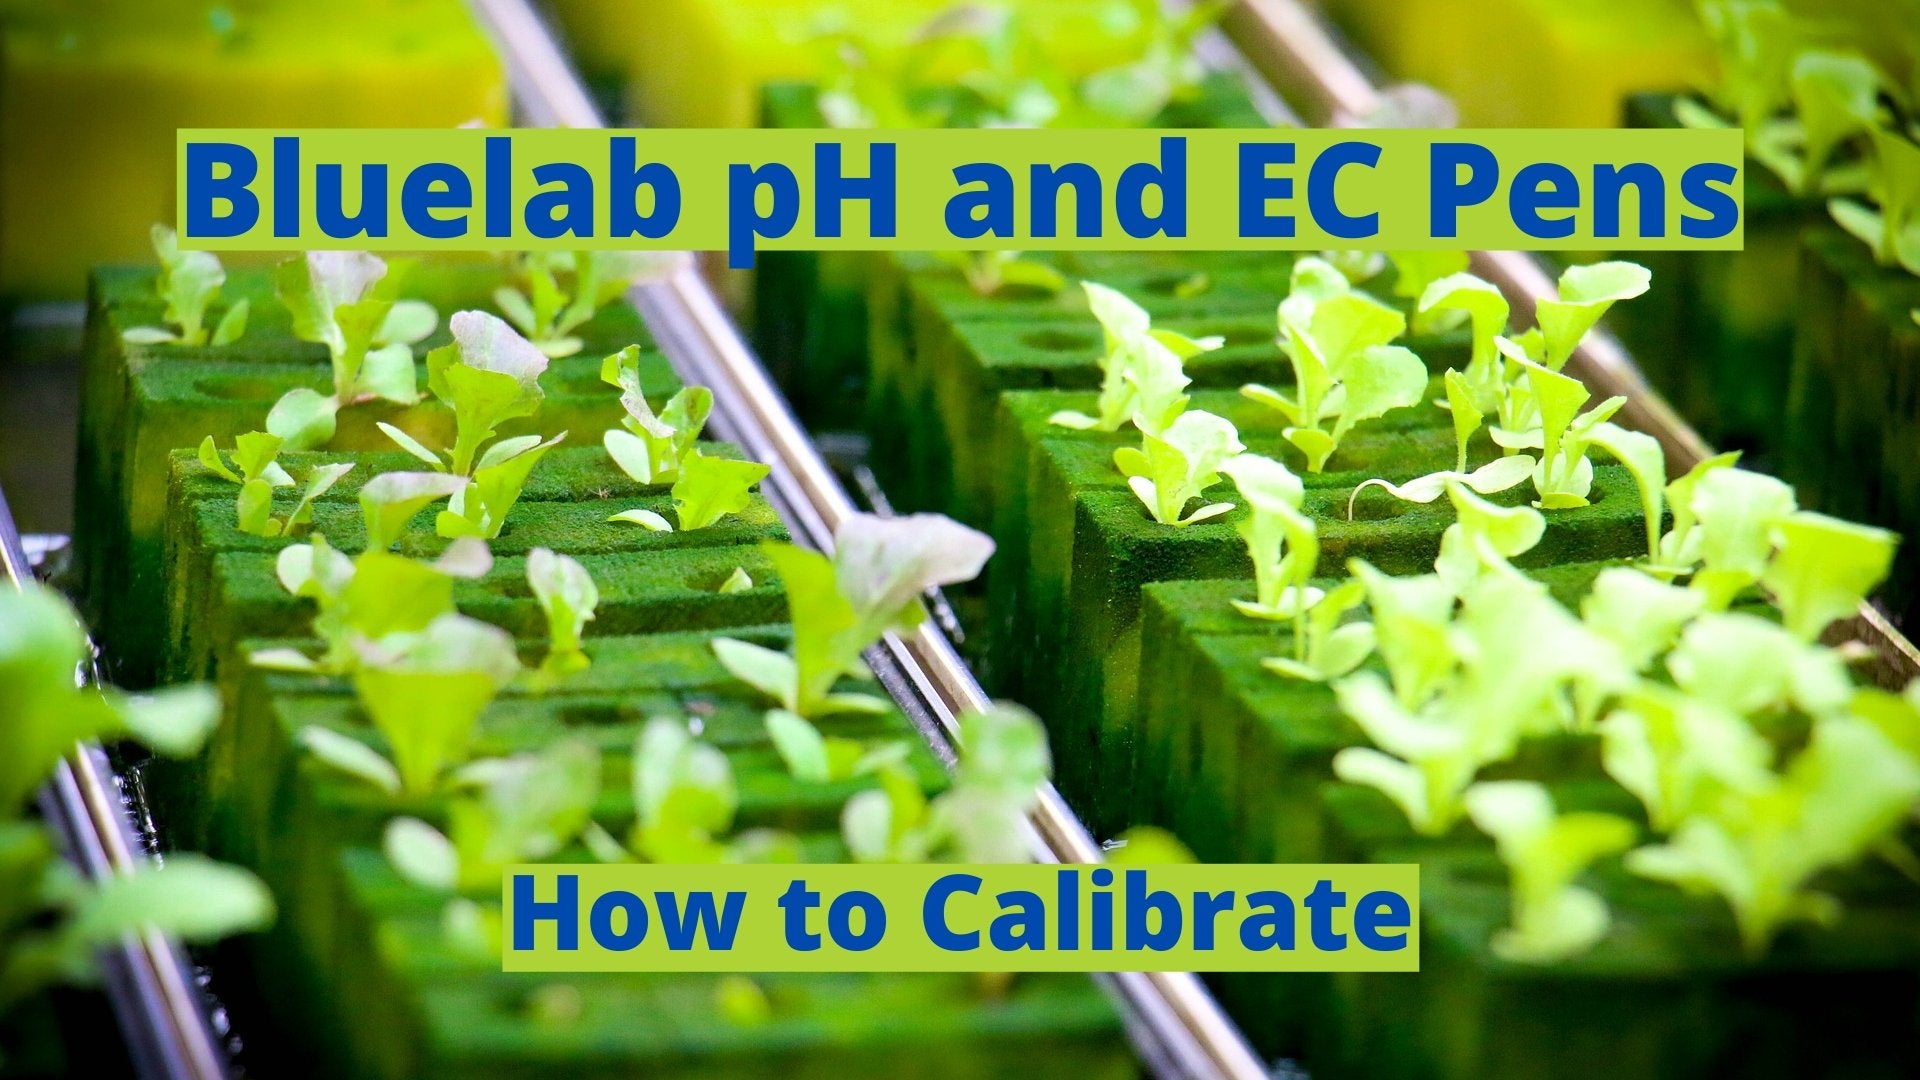 How To Calibrate the Bluelab pH and EC Pens - The Hippie House